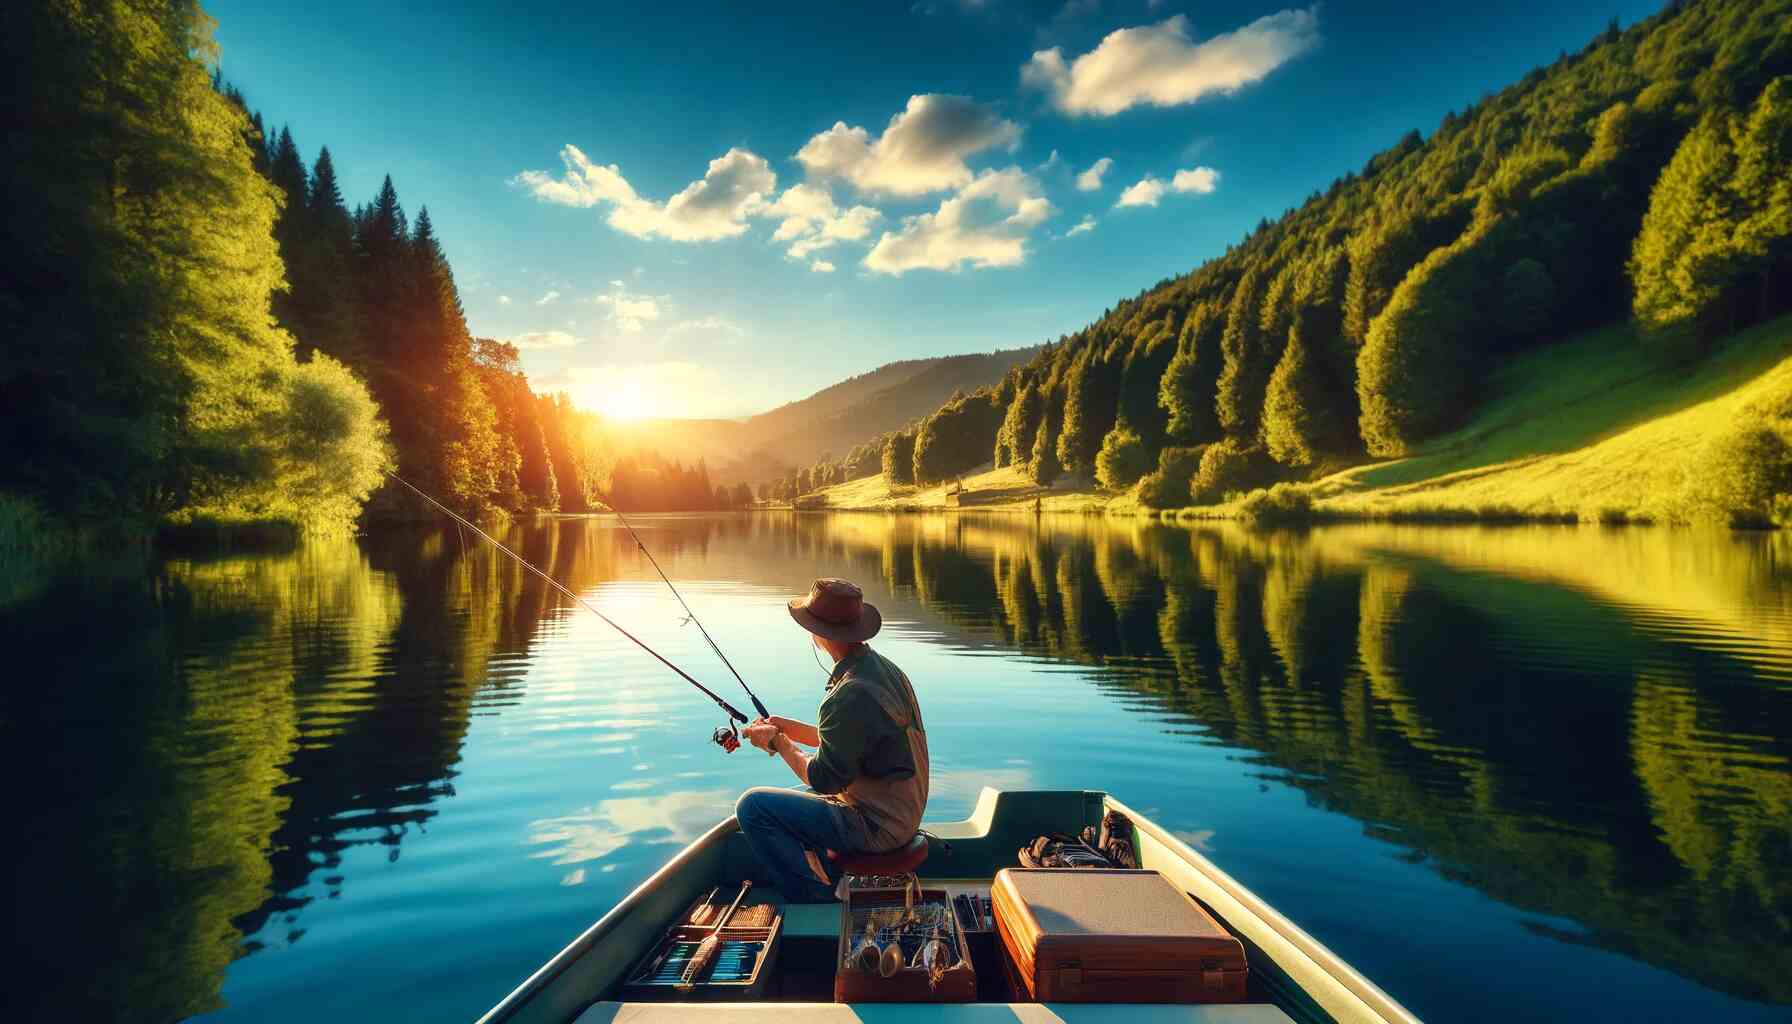 A picturesque summer fishing scene at a serene lake with an angler casting a line from a small boat, surrounded by lush green trees and a clear blue sky, with the sun setting and casting a golden hue across the landscape. The angler is equipped with fishing gear, wearing a hat and polarized sunglasses. A tackle box and fishing rods are visible in the boat, creating a perfect summer fishing adventure atmosphere.